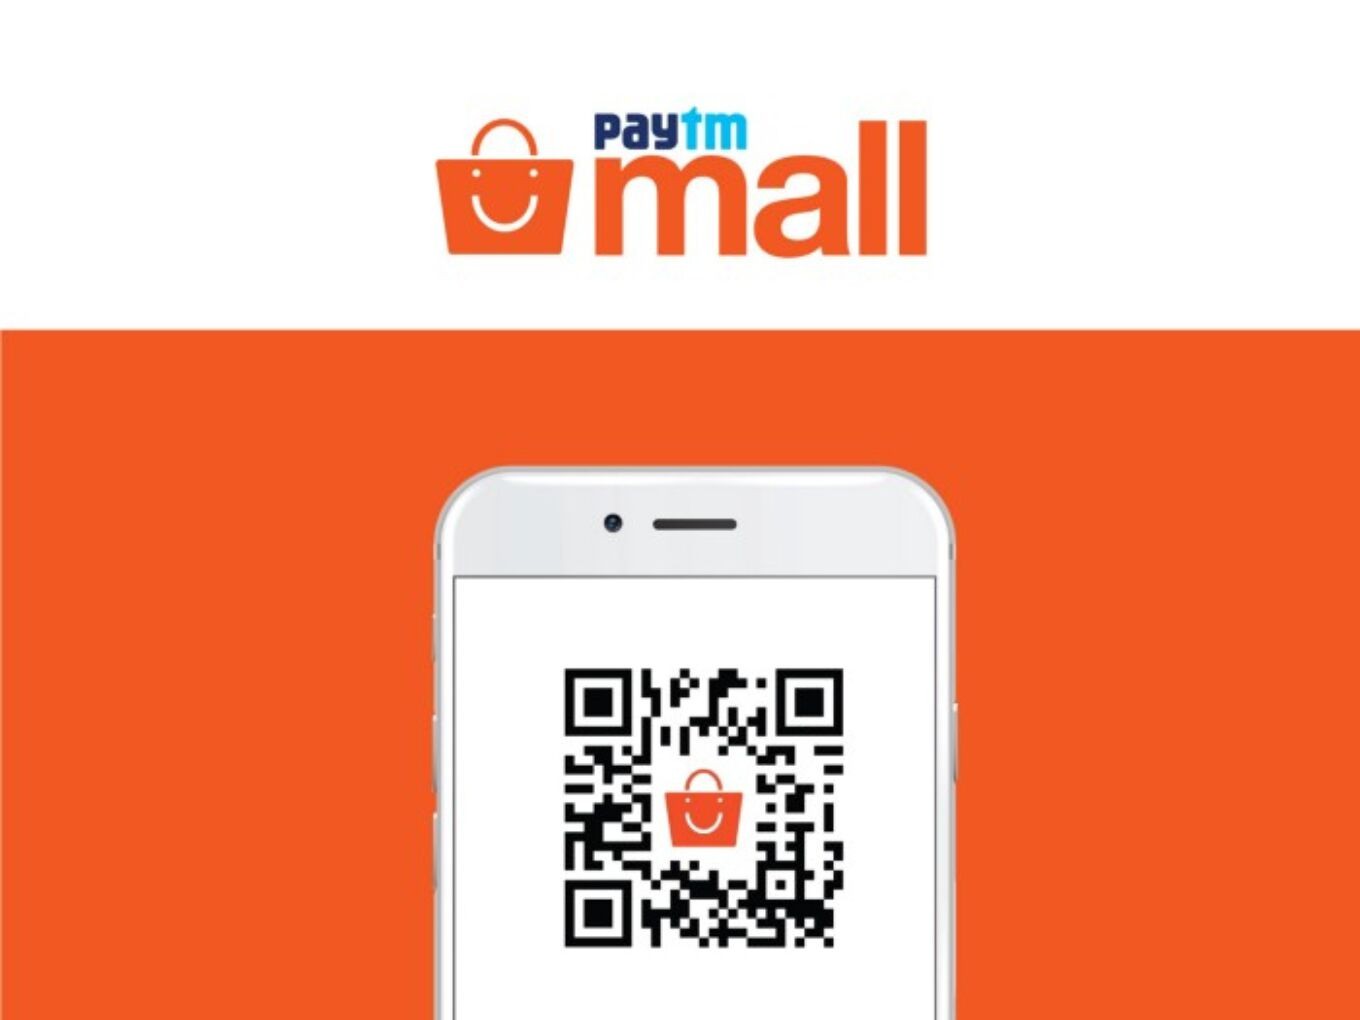 Paytm Mall Undergoes Company Restructuring Post The Hyperlocal Pivot